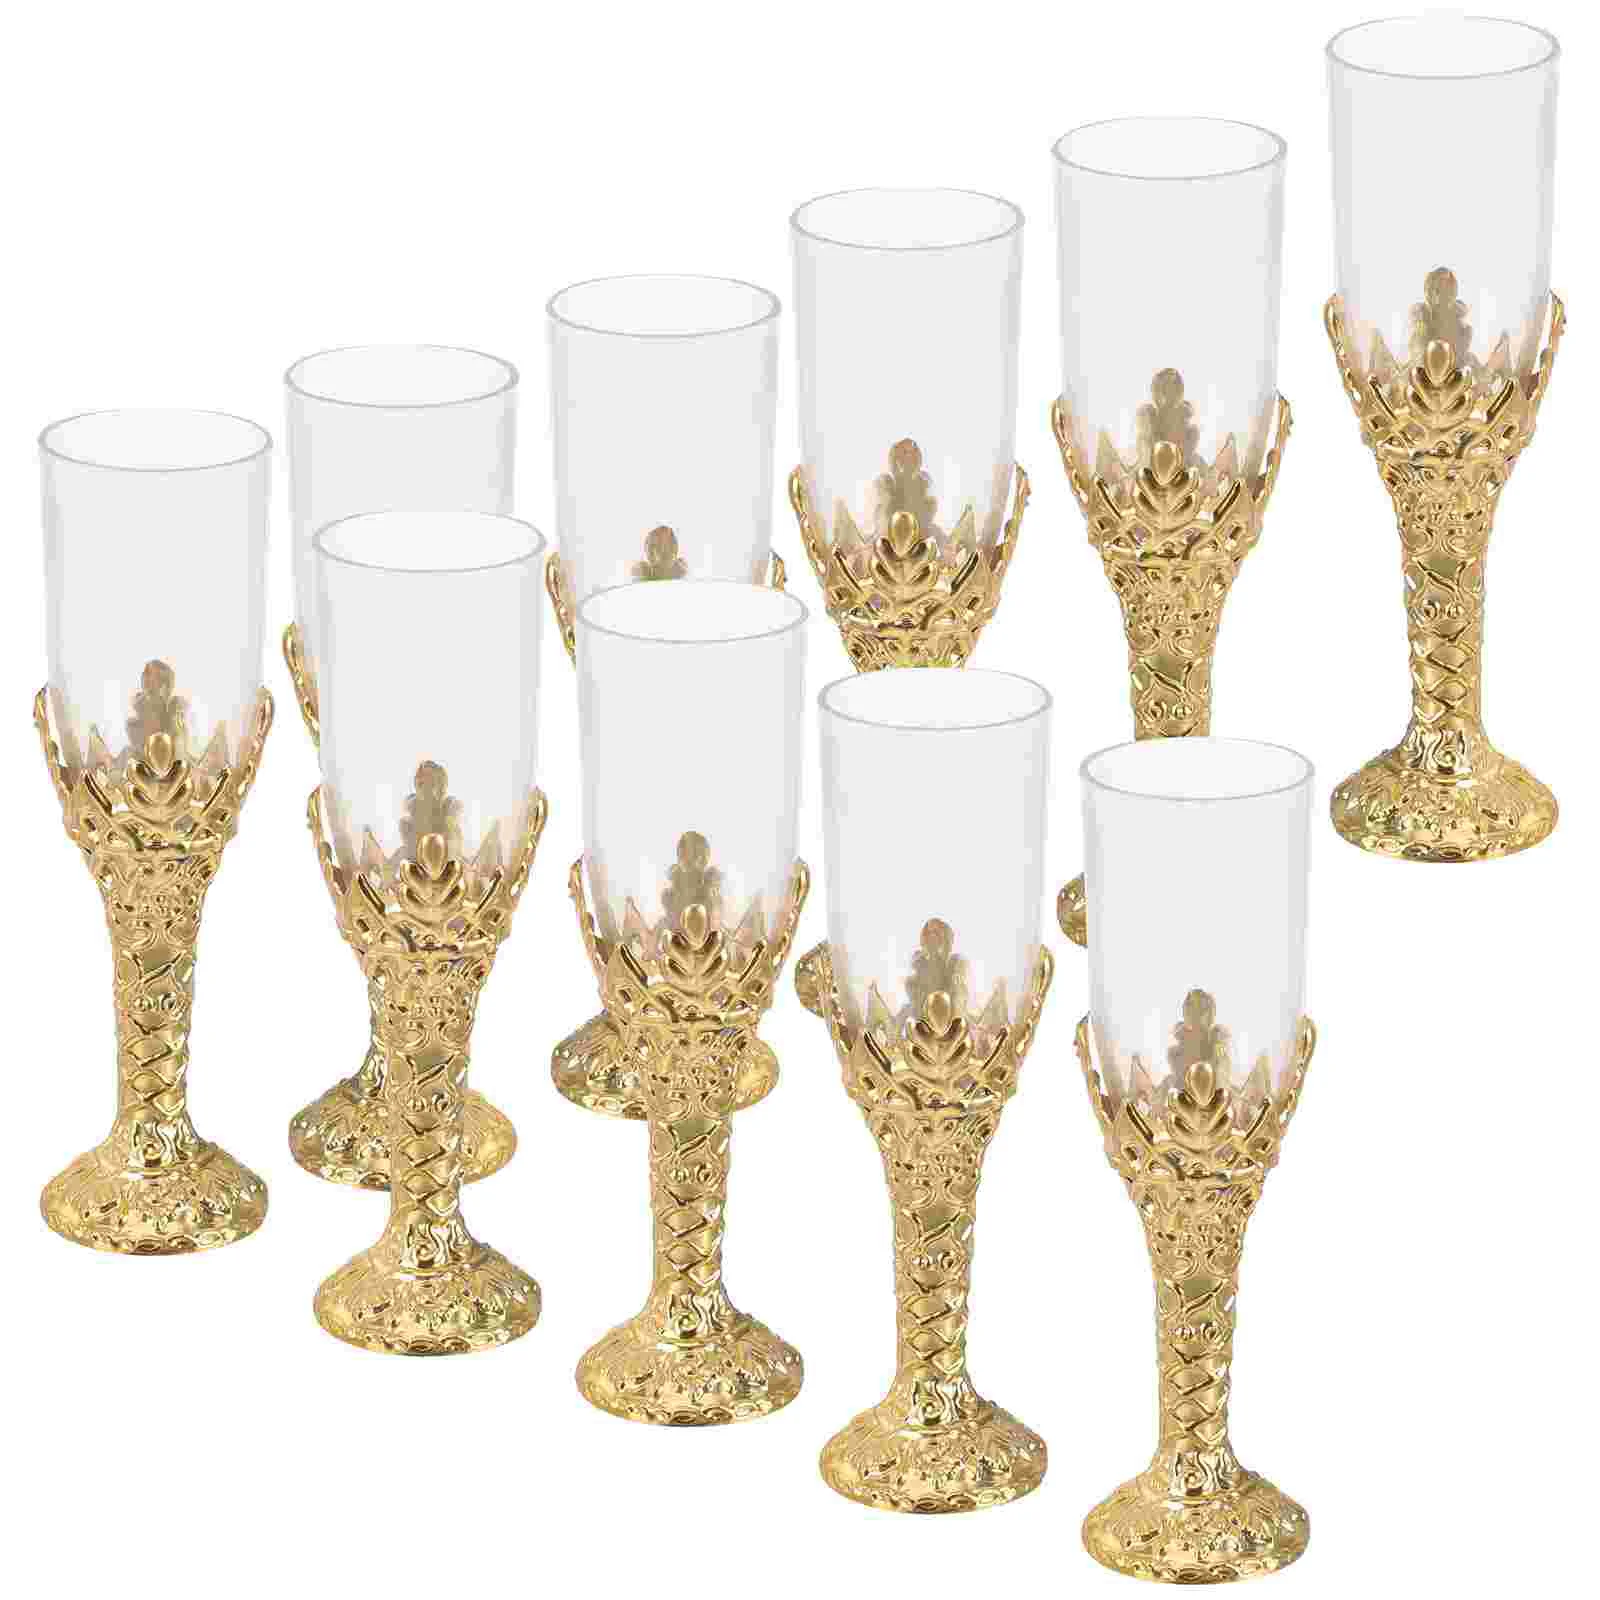 

12pcs Multi-function Cup Delicate Goblet Decorative Church Supply Cup